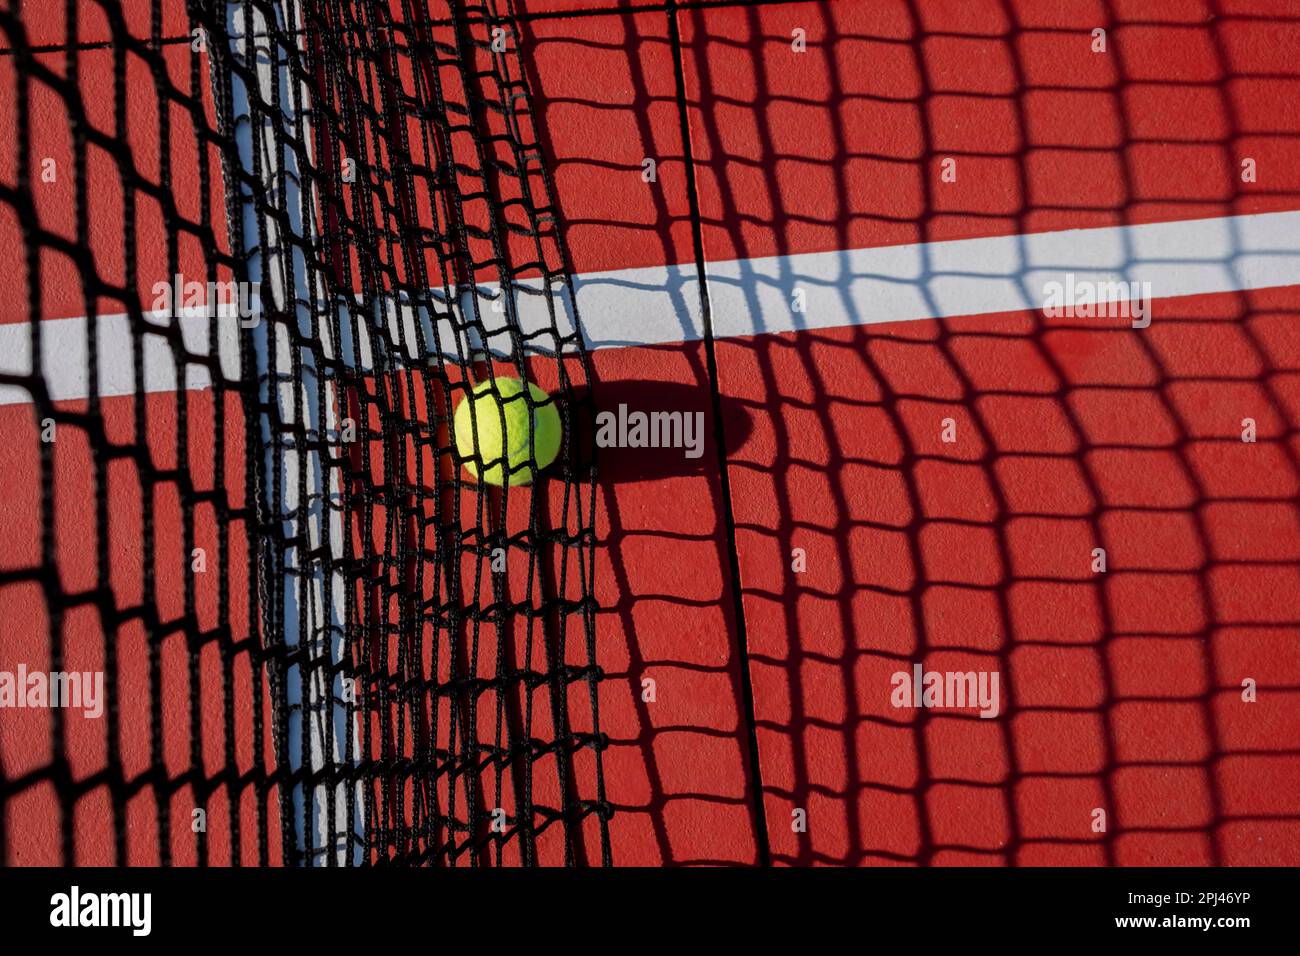 selective focus, a ball on the net of a red tennis court. Stock Photo